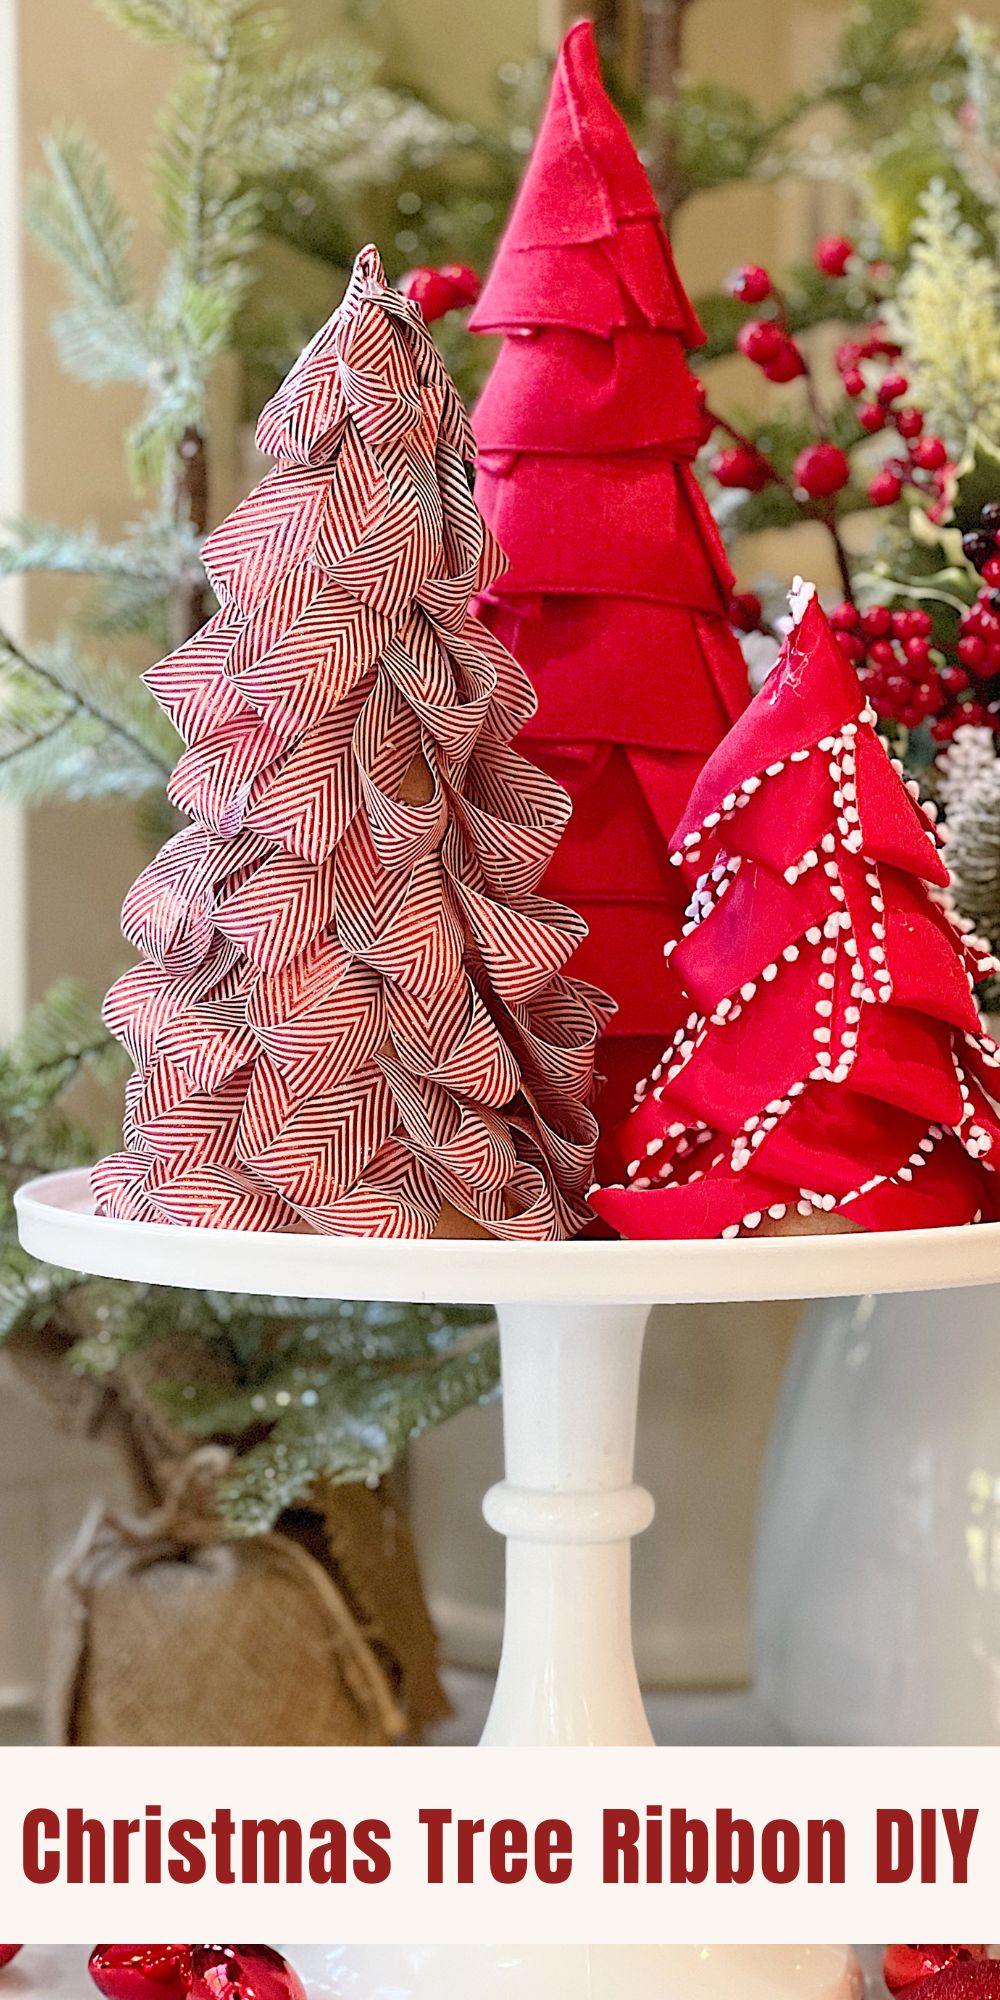 I love making small trees for Christmas and gave a try with some ribbon. I think you are going to love making this Christmas tree ribbon DIY.